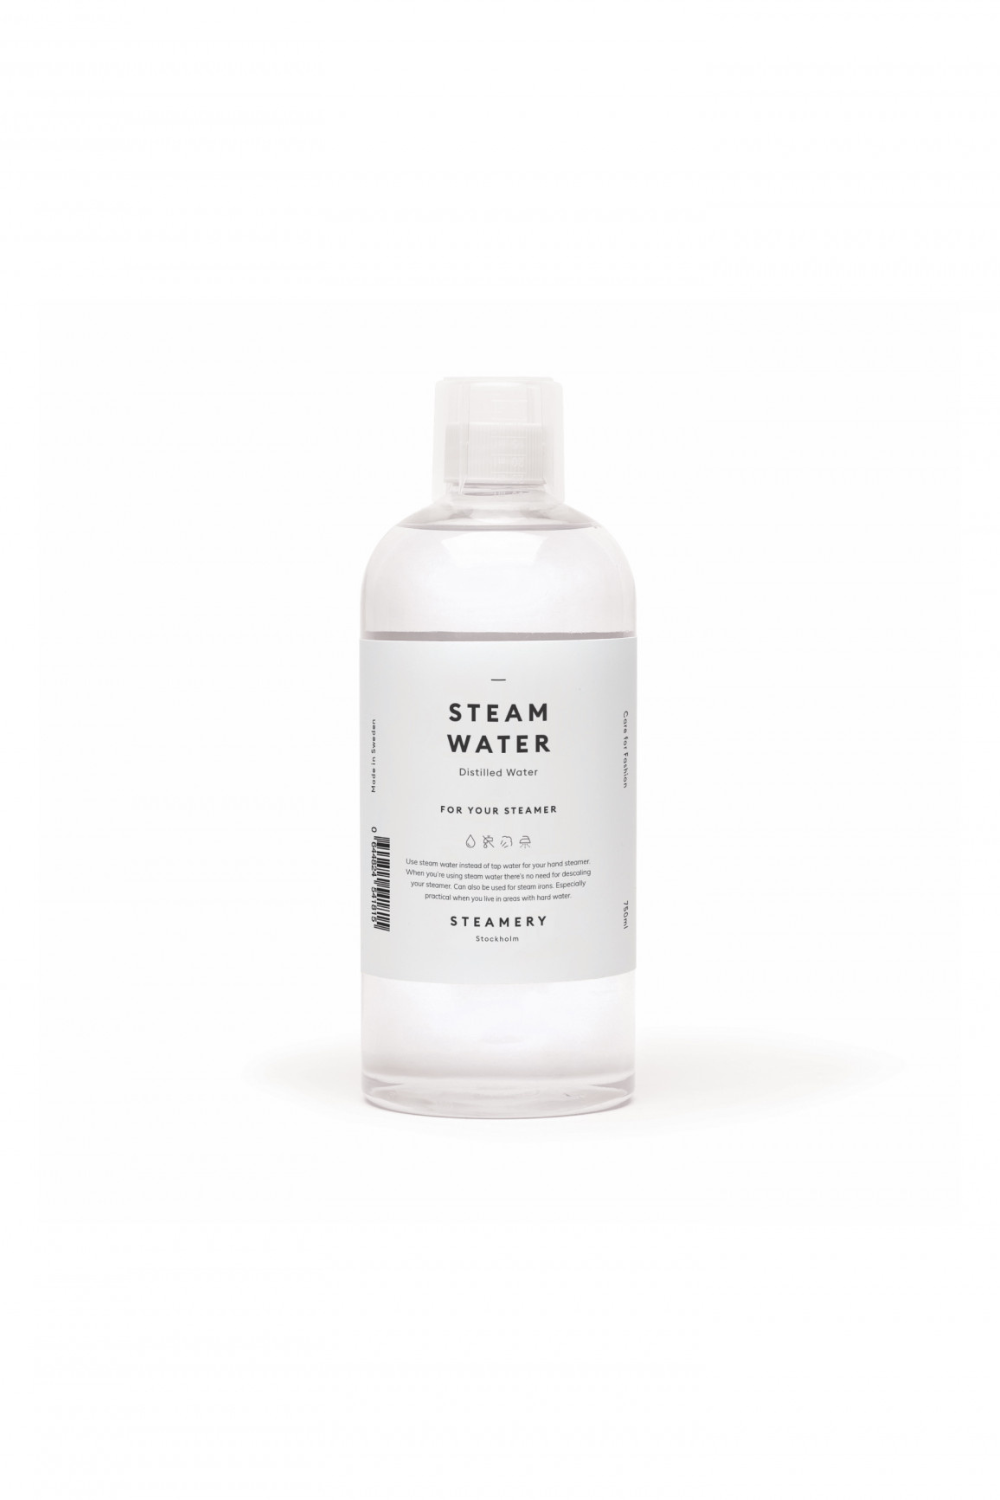 O'TAY Steam Water Care Products 750 ml